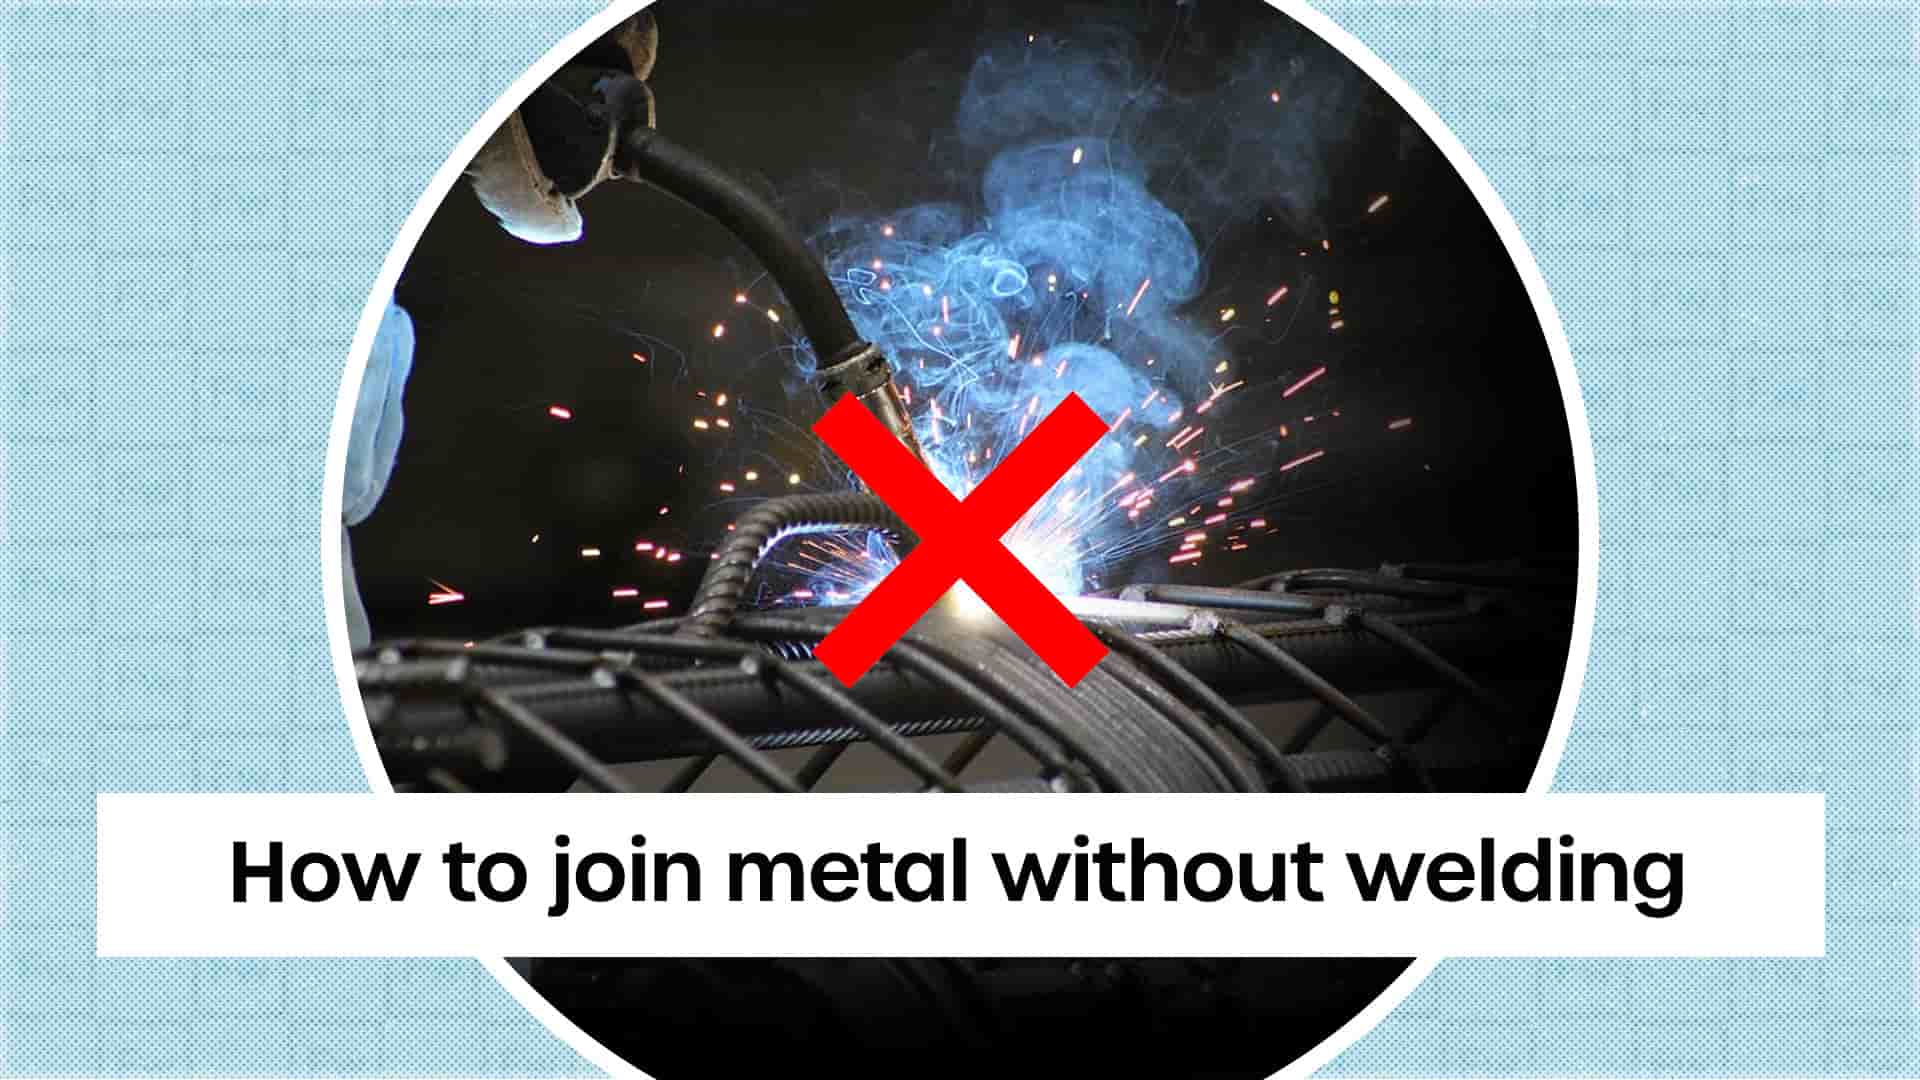 Joining metal to metal without welding